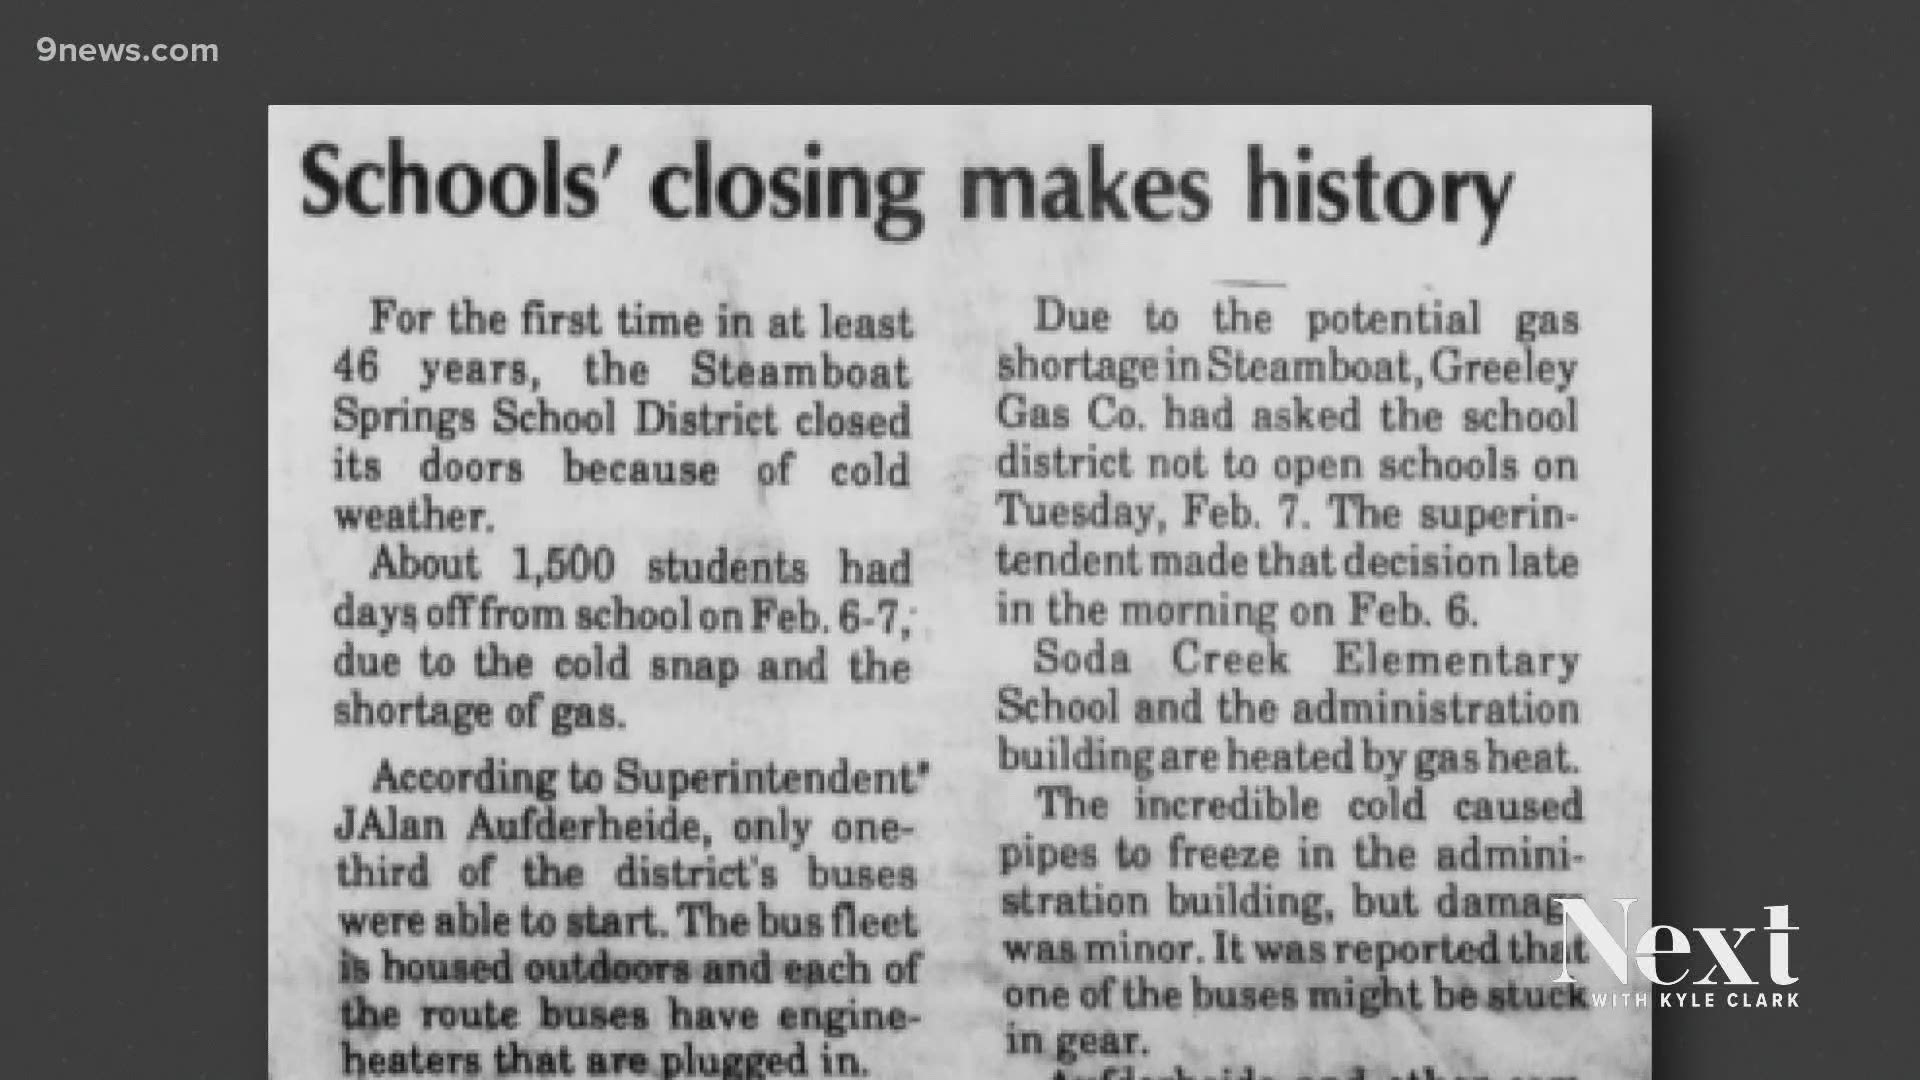 On Feb. 1, 1985, Maybell, Colorado, hit -61 degrees. We've wondered for months if Moffat County Schools had classes then. Today, we got our answer.